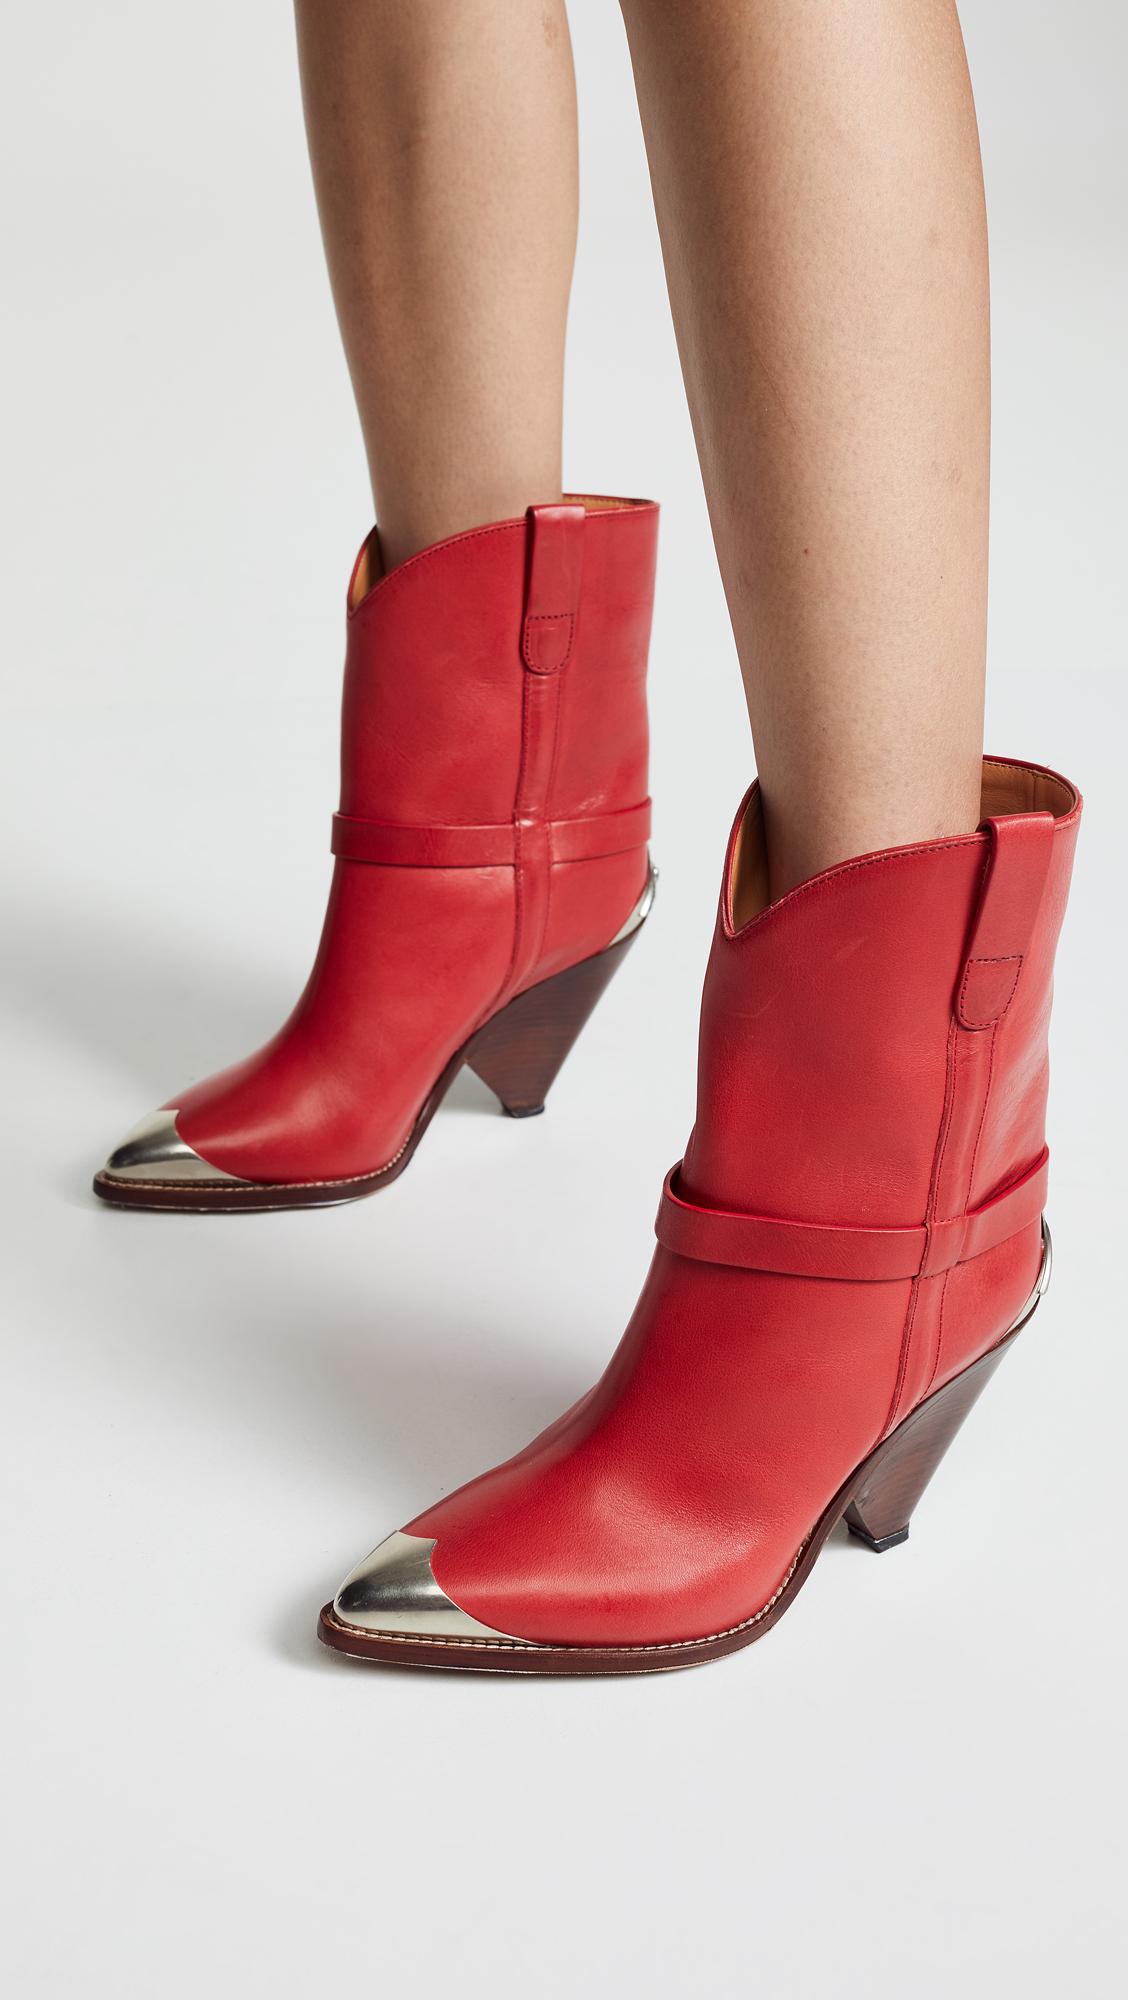 Isabel Marant Lamsy Leather Boots in Red - Lyst